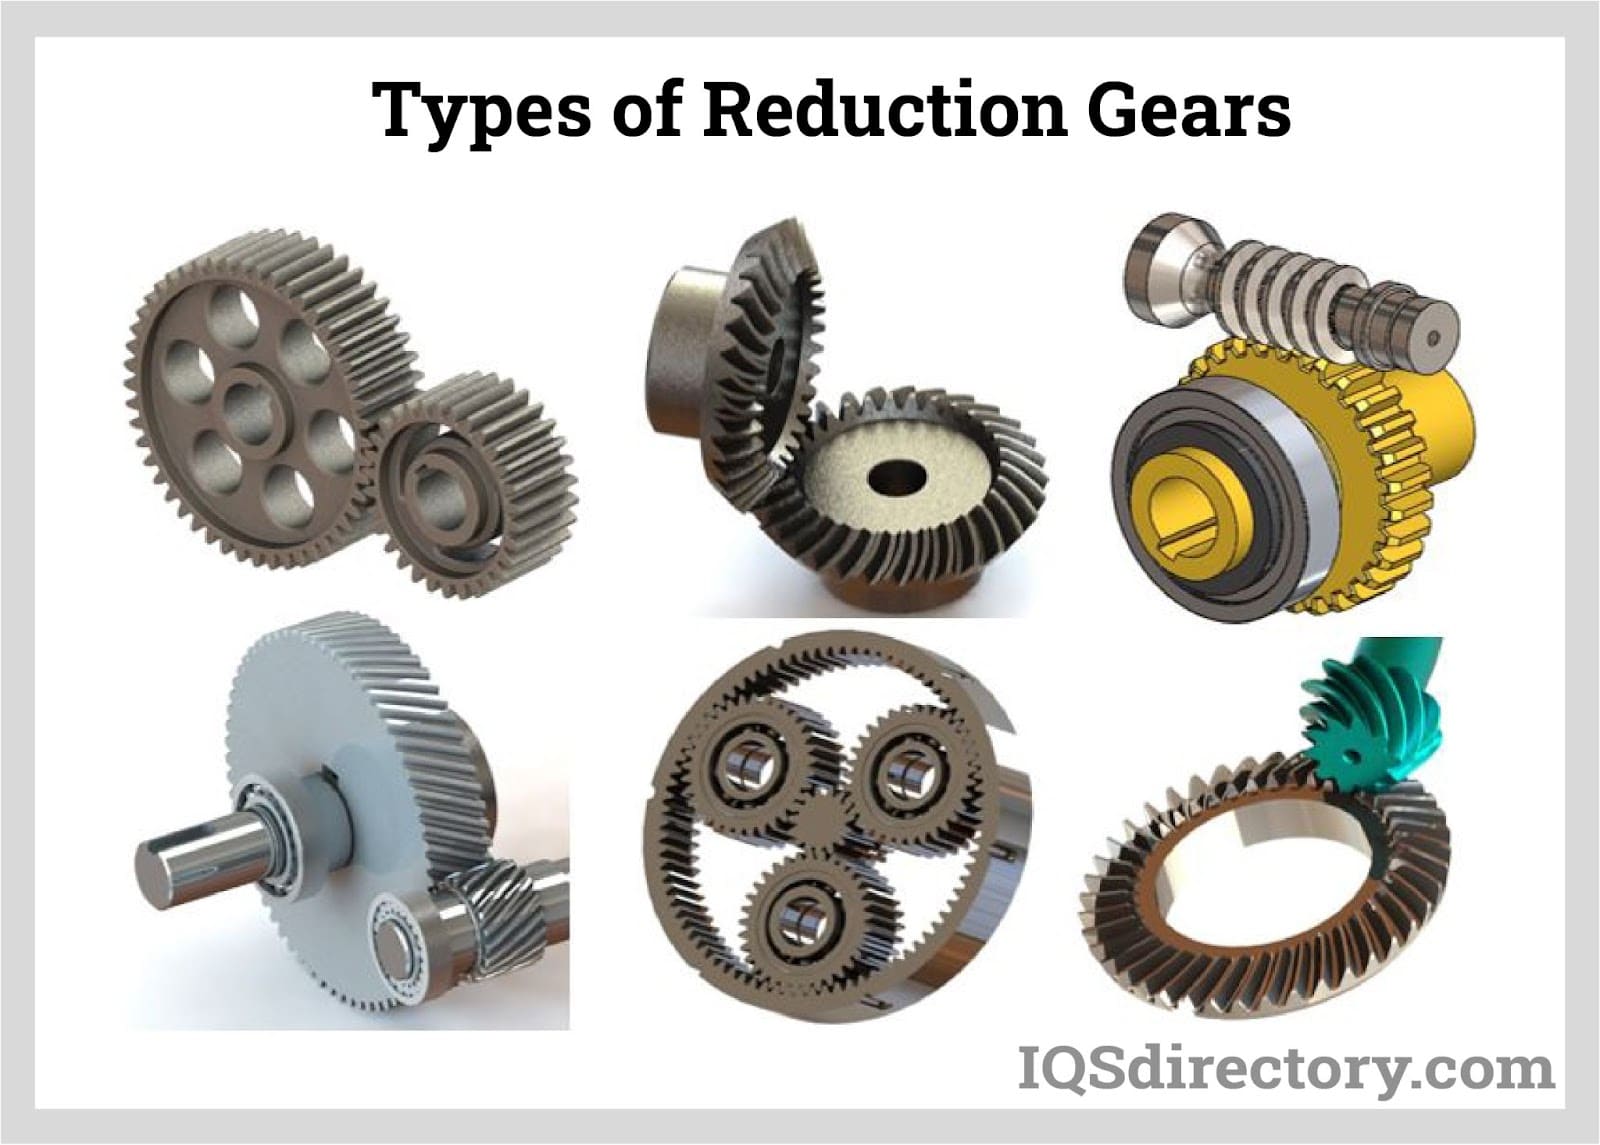 Gear Reducers: Types, Operation, Process, and Maintenance